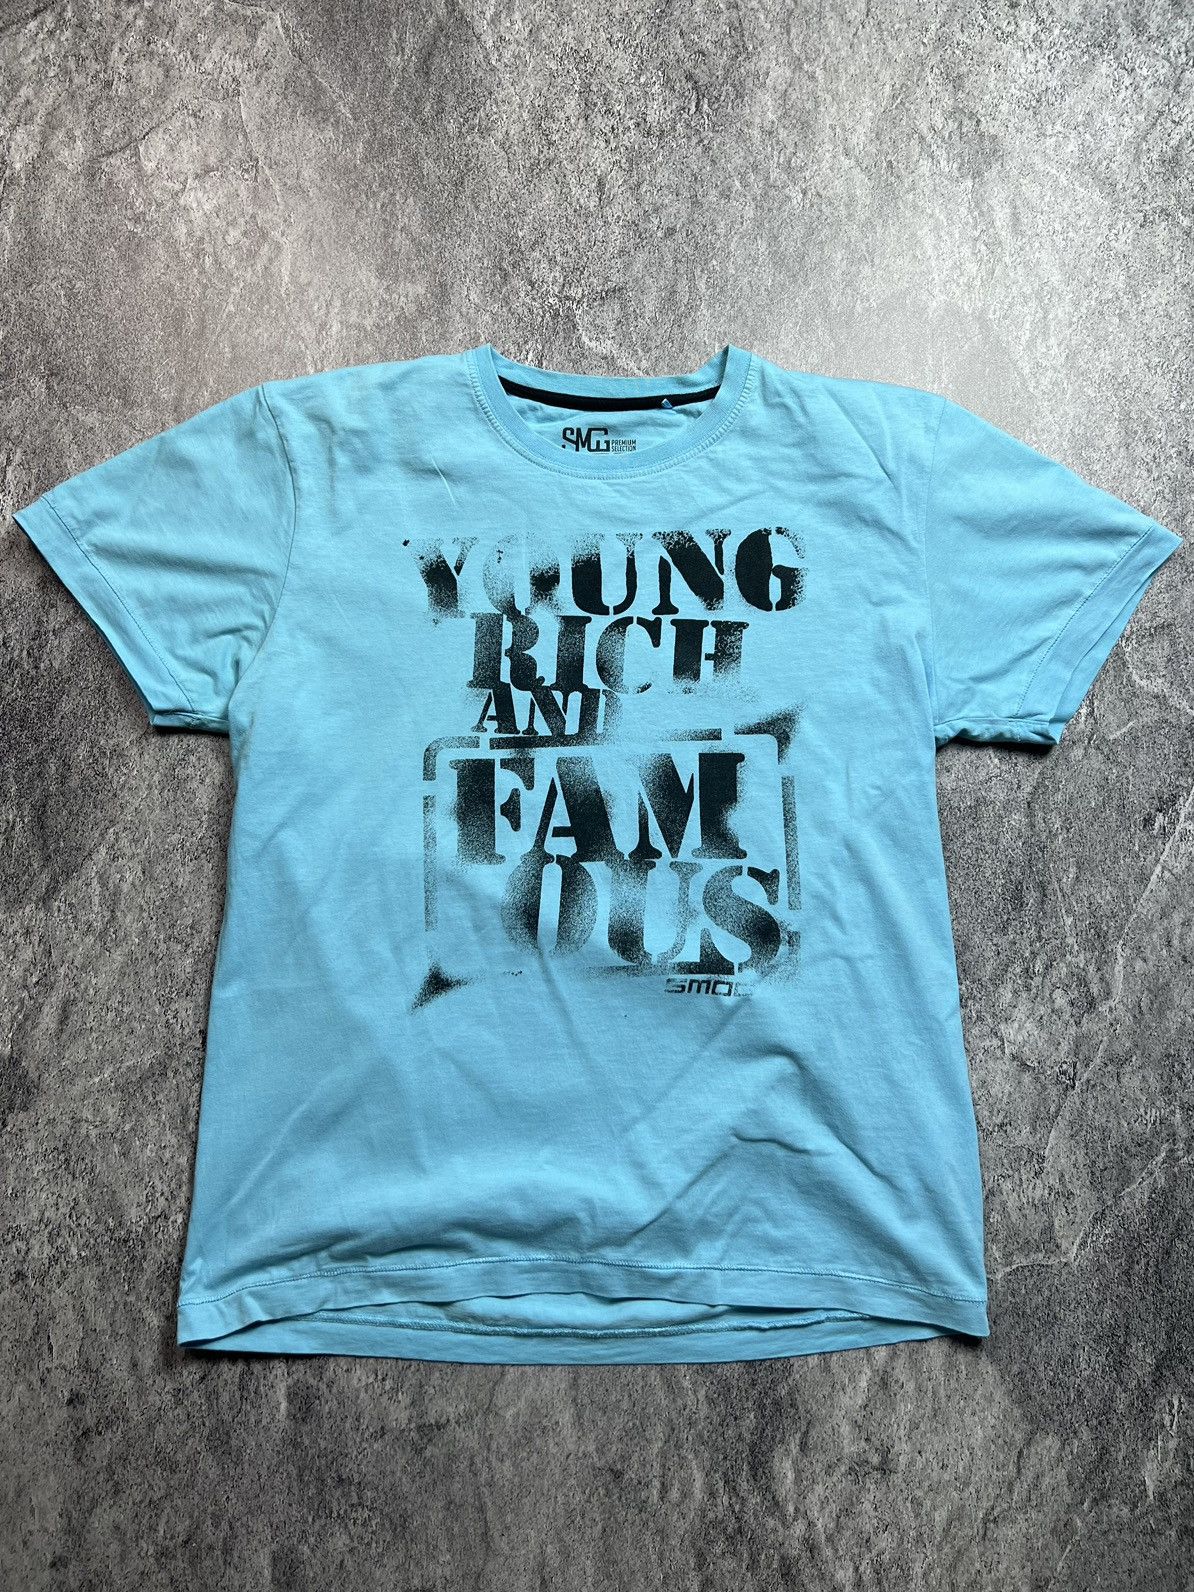 Pre-owned Humör Yung Rich And Famous Archival Swag Humor Japan Style Tee In Blue